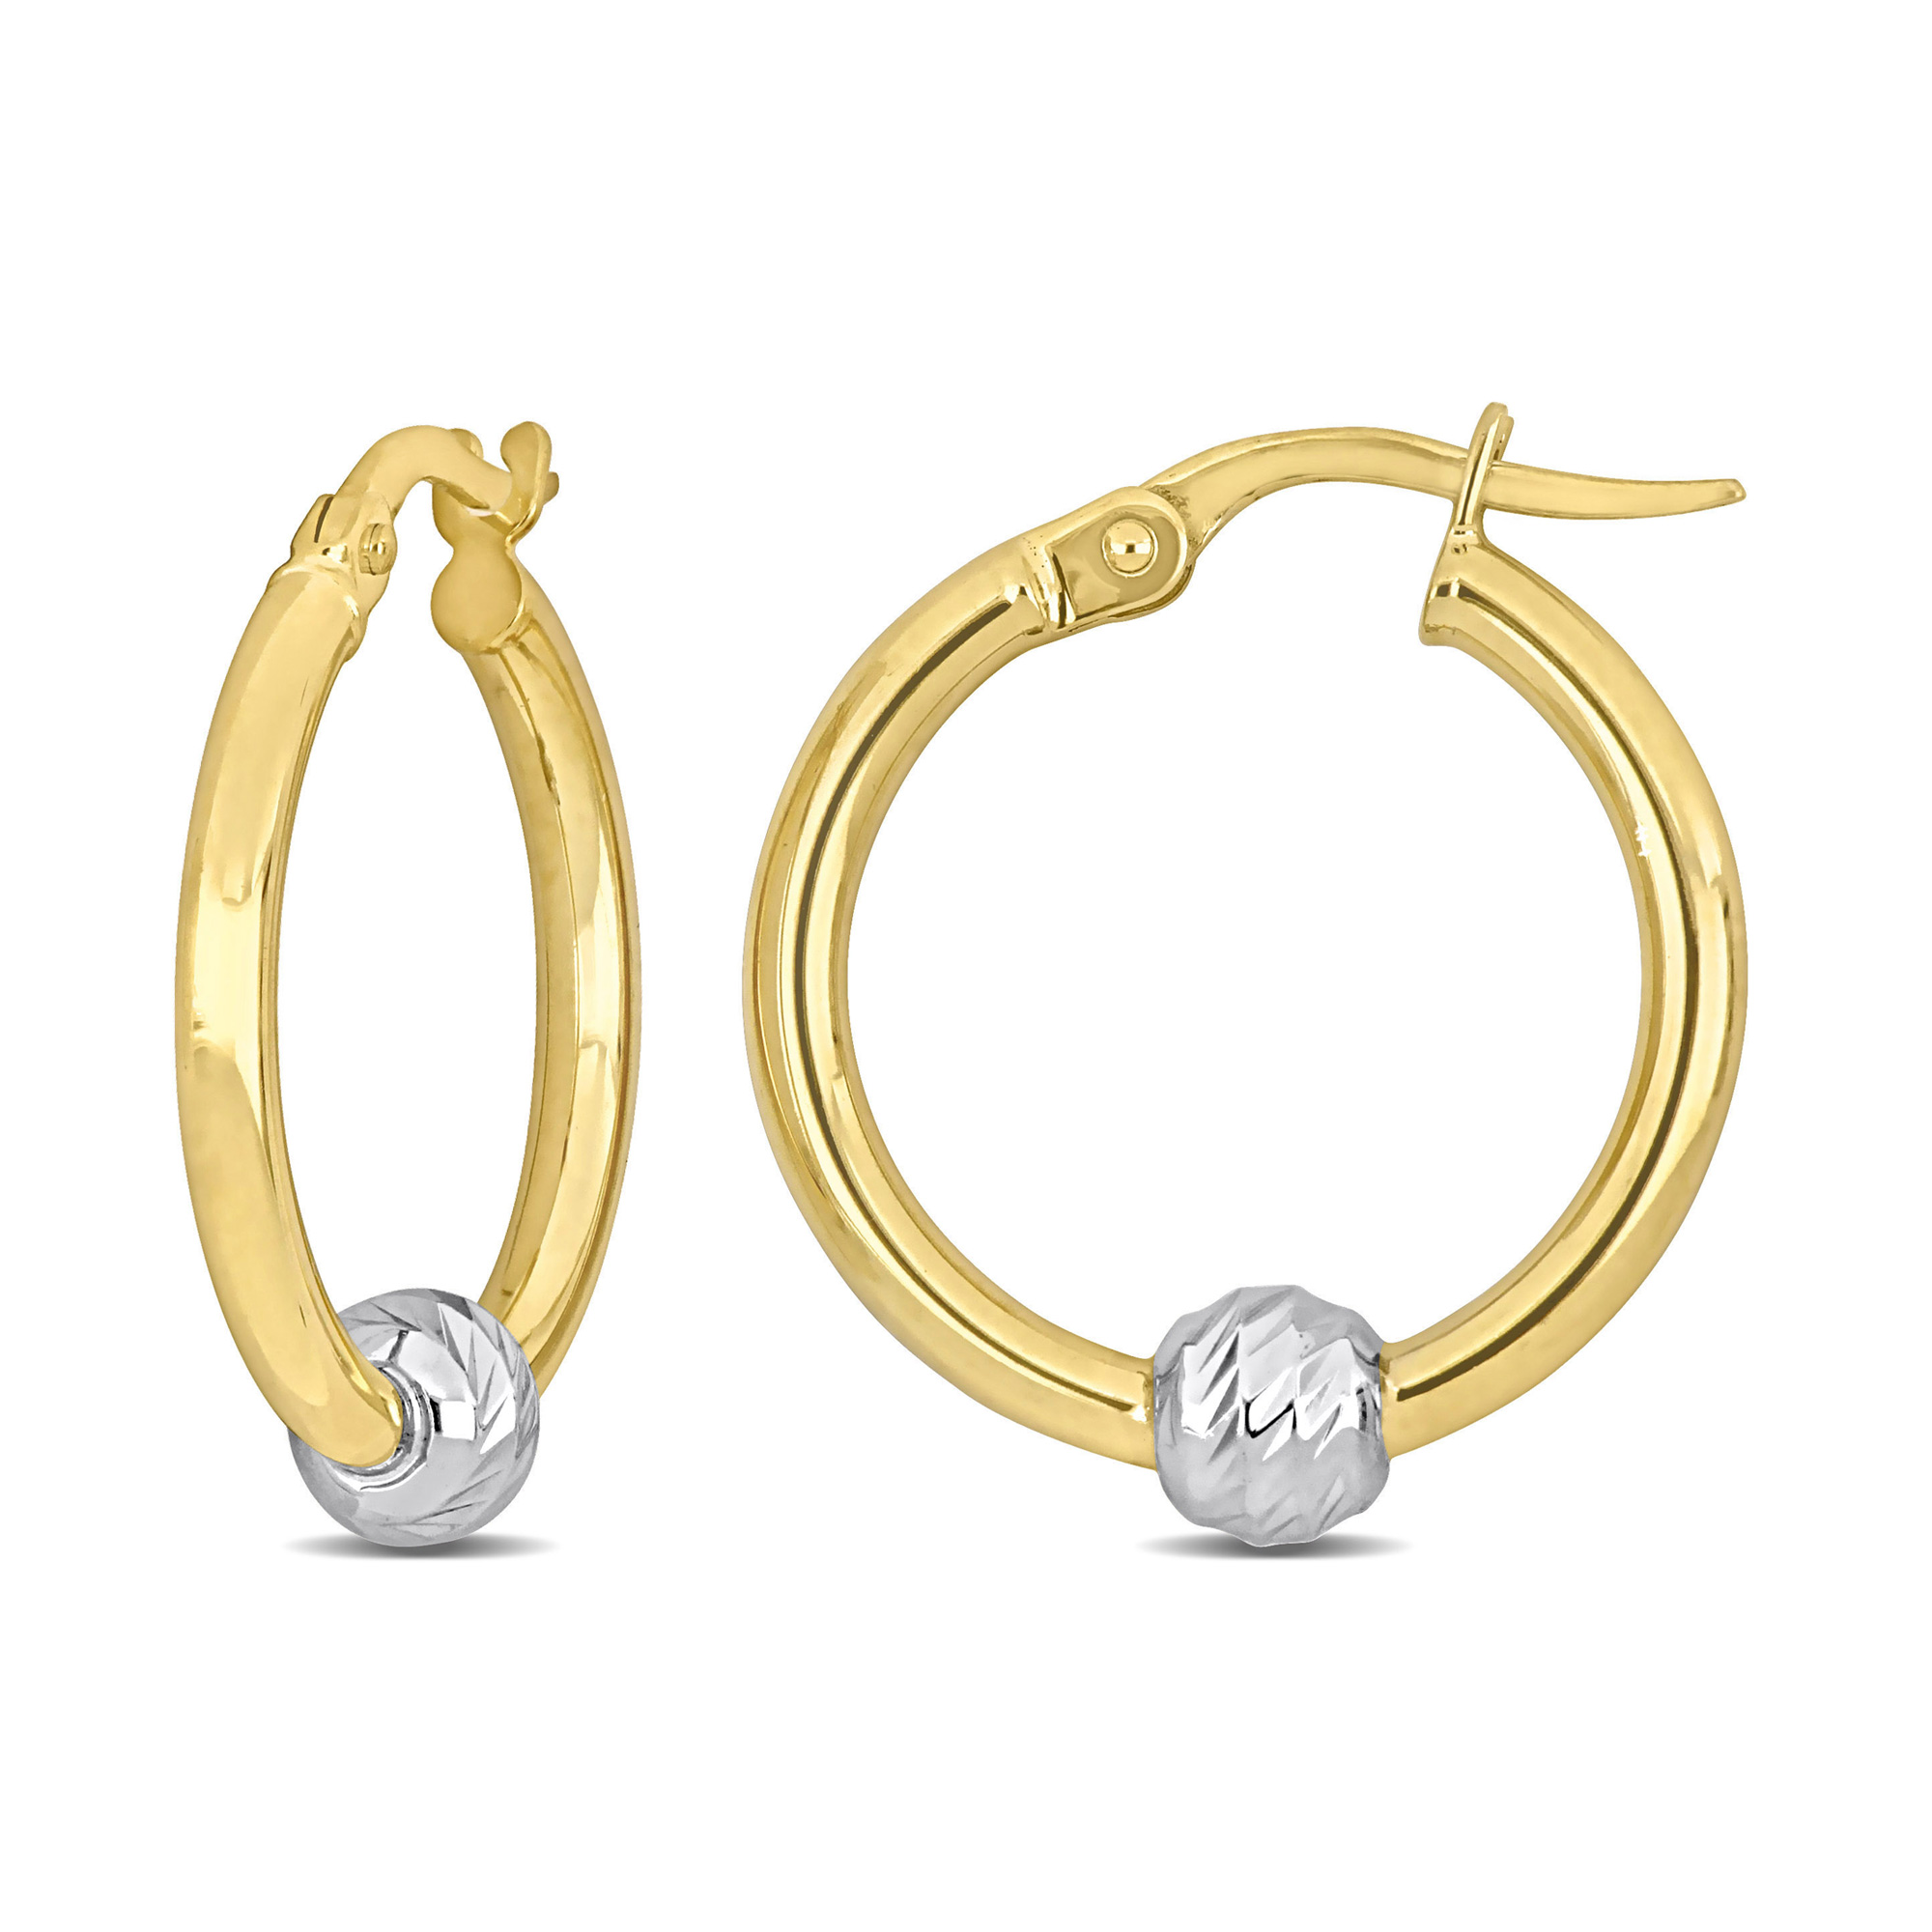 Two-Tone Yellow Gold Hoop with White Gold Bead Earrings